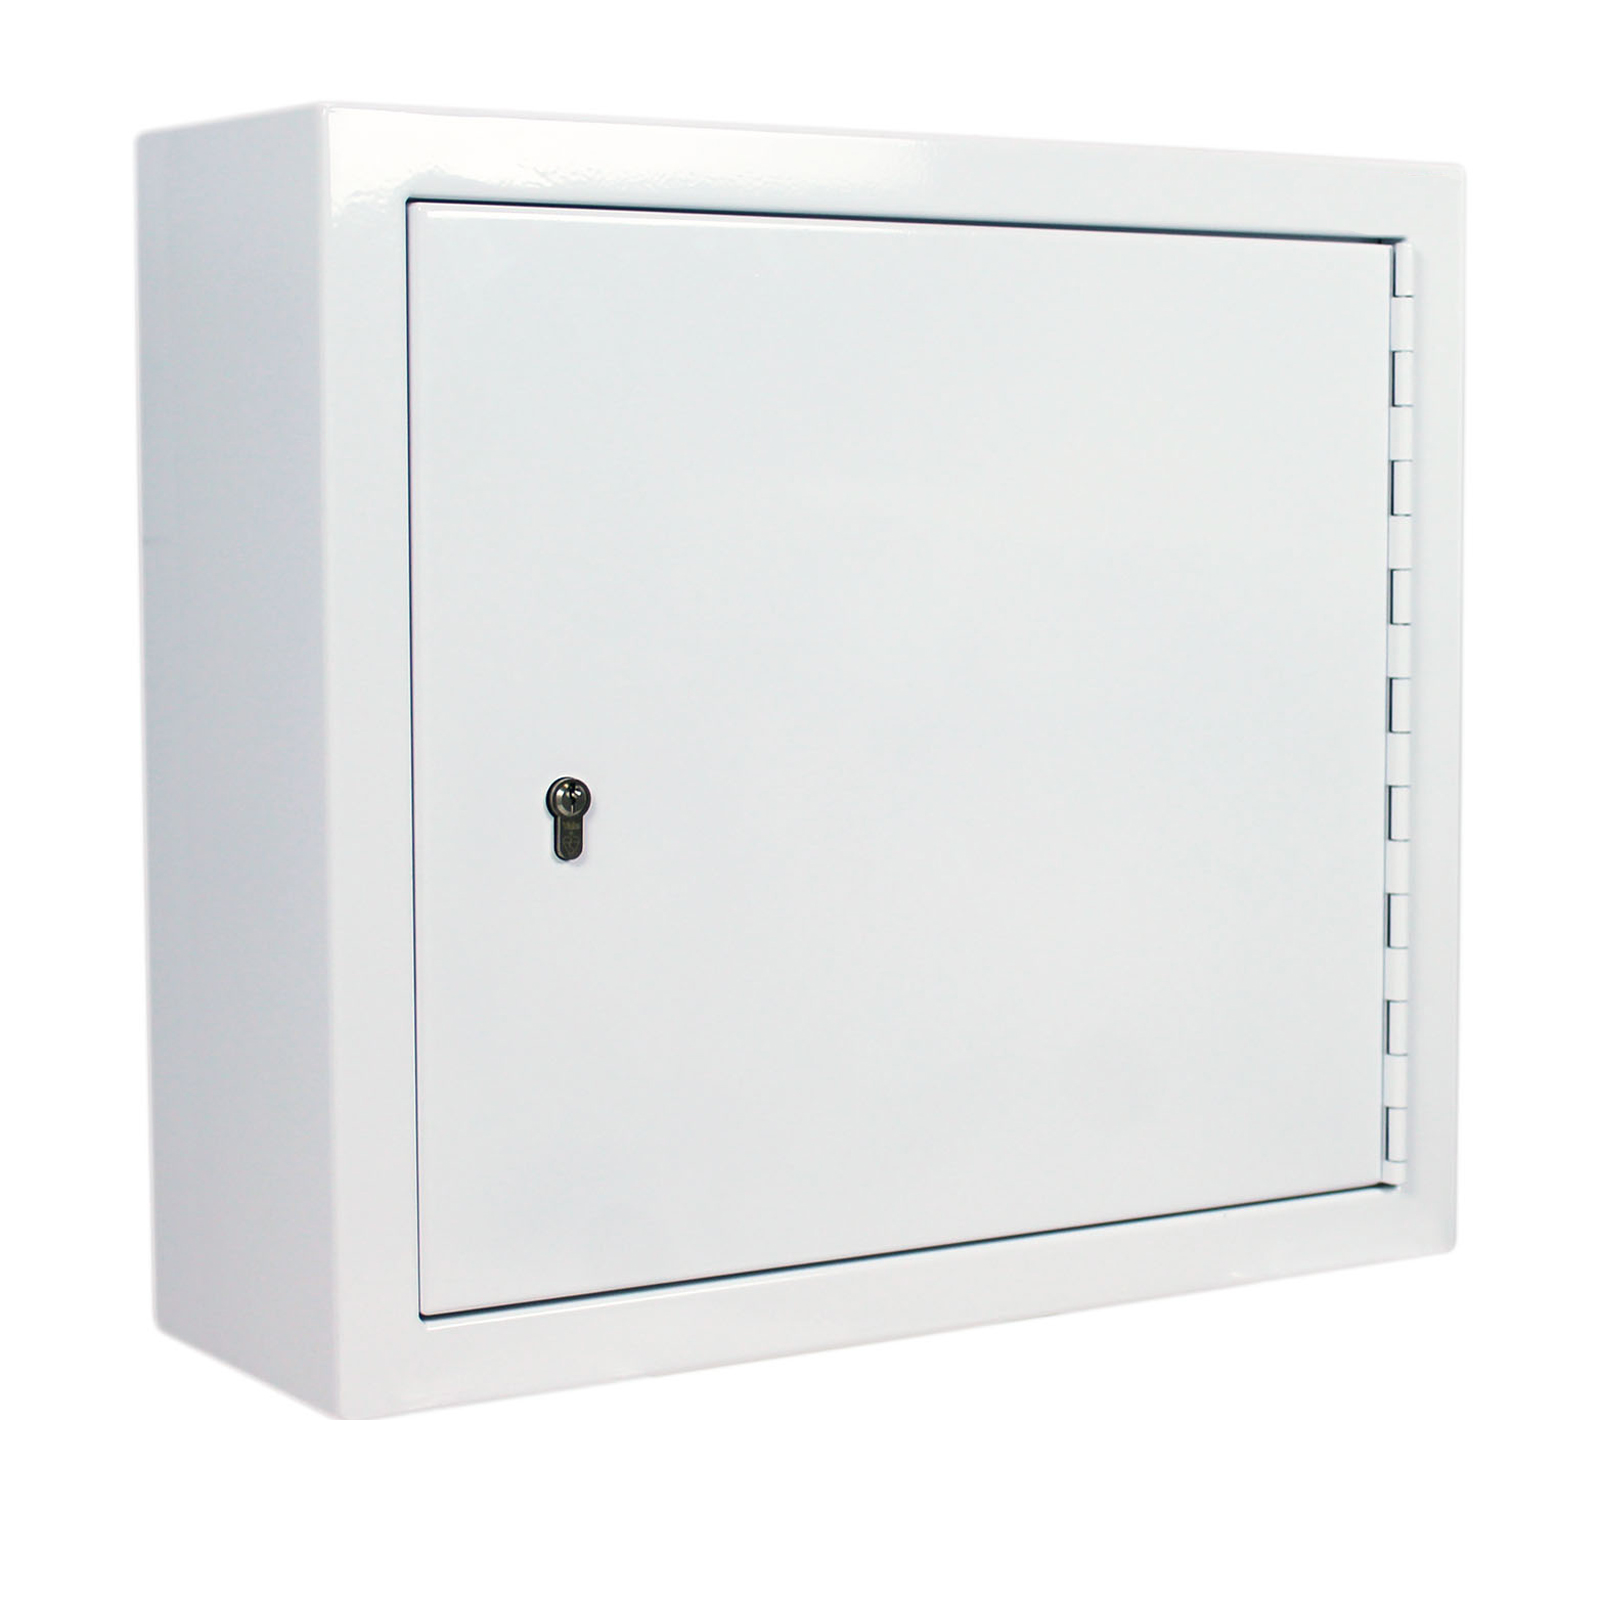 FPD 12146 43 litre controlled drugs cabinet with closed door